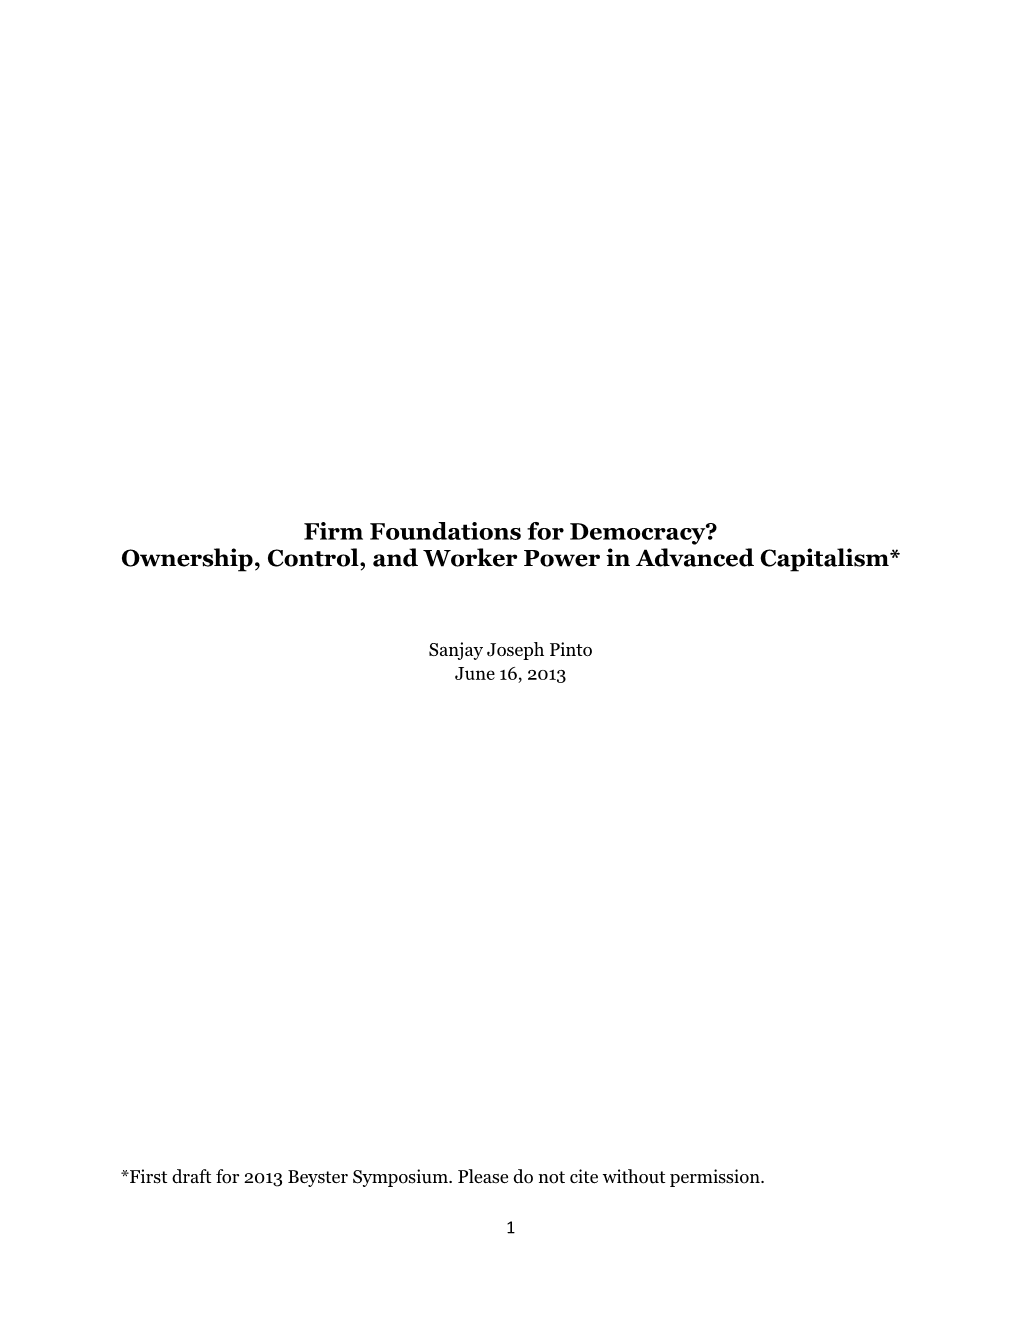 Firm Foundations for Democracy? Ownership, Control, and Worker Power in Advanced Capitalism*